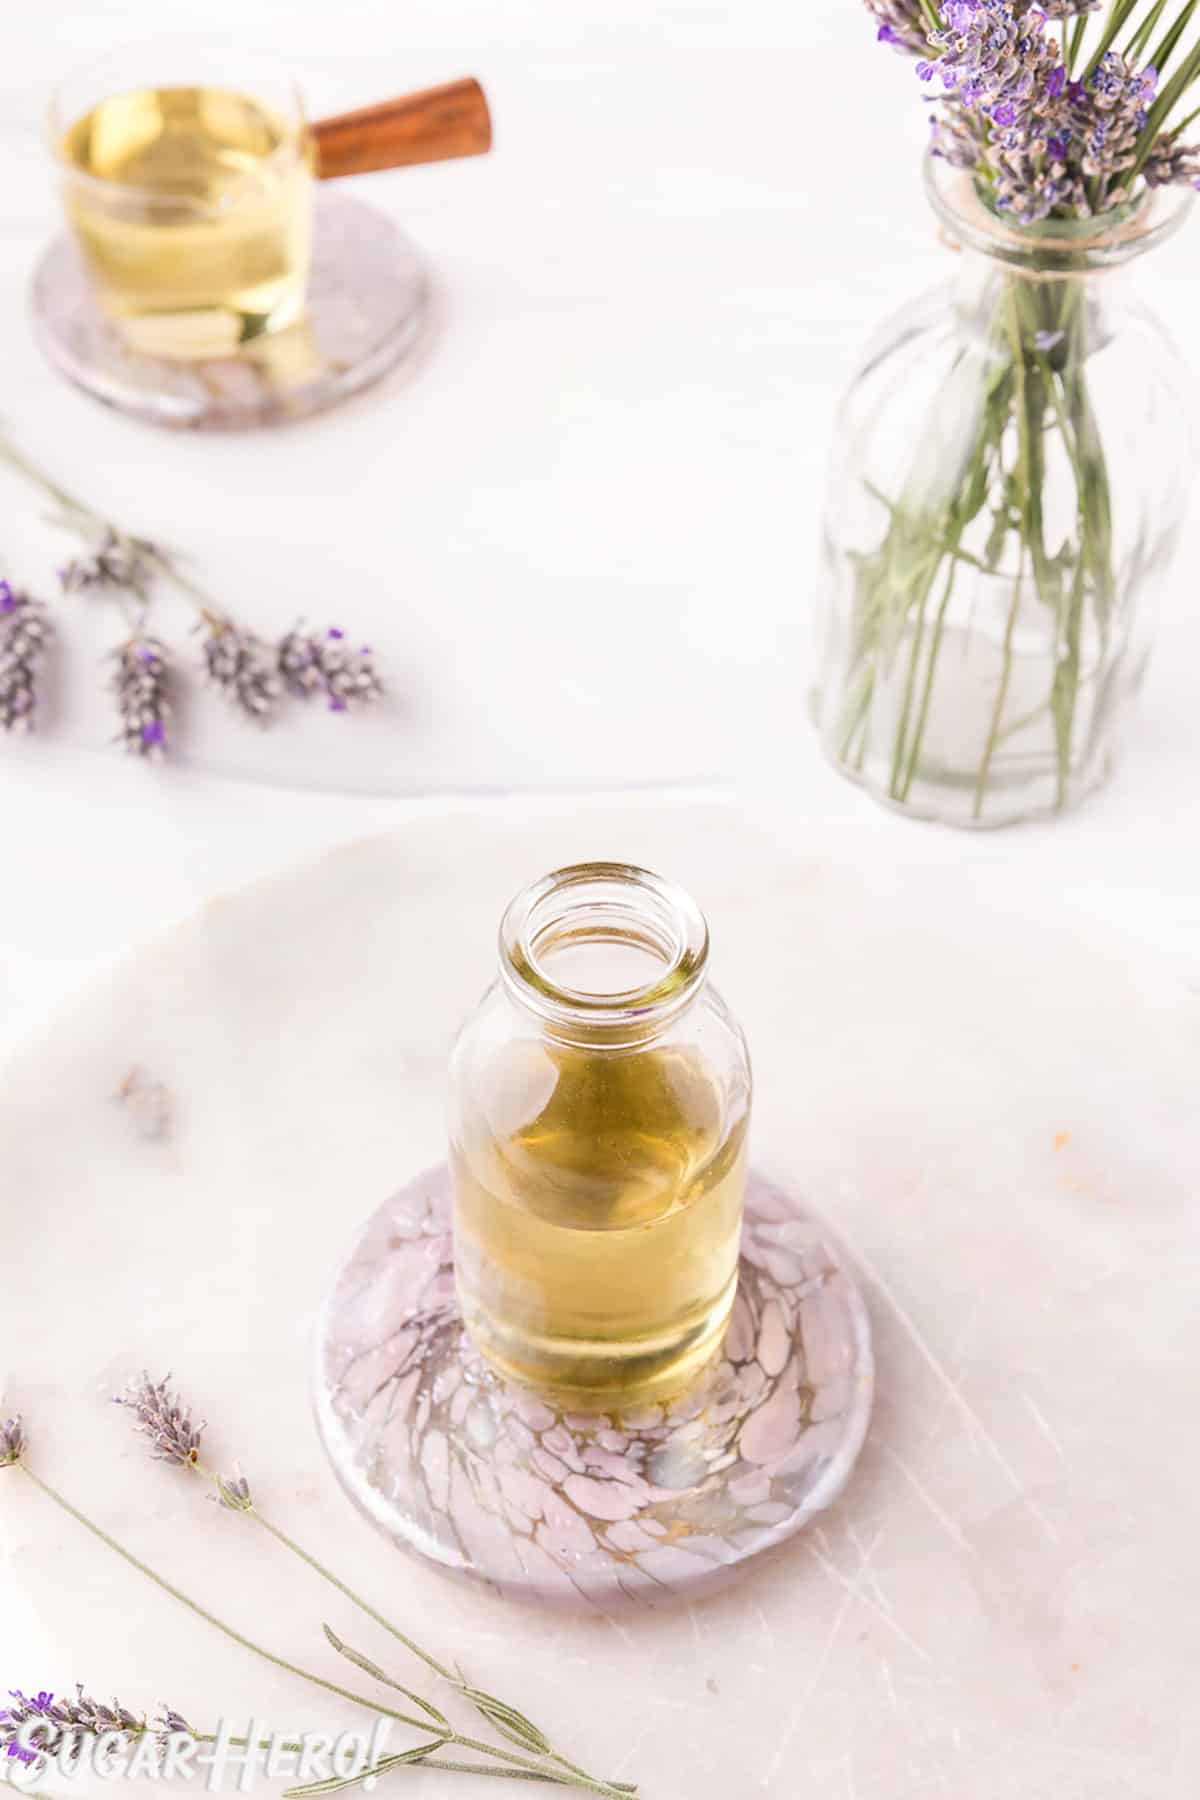 Lavender syrup in a glass jar on a marble plate, with fresh lavender scattered around.